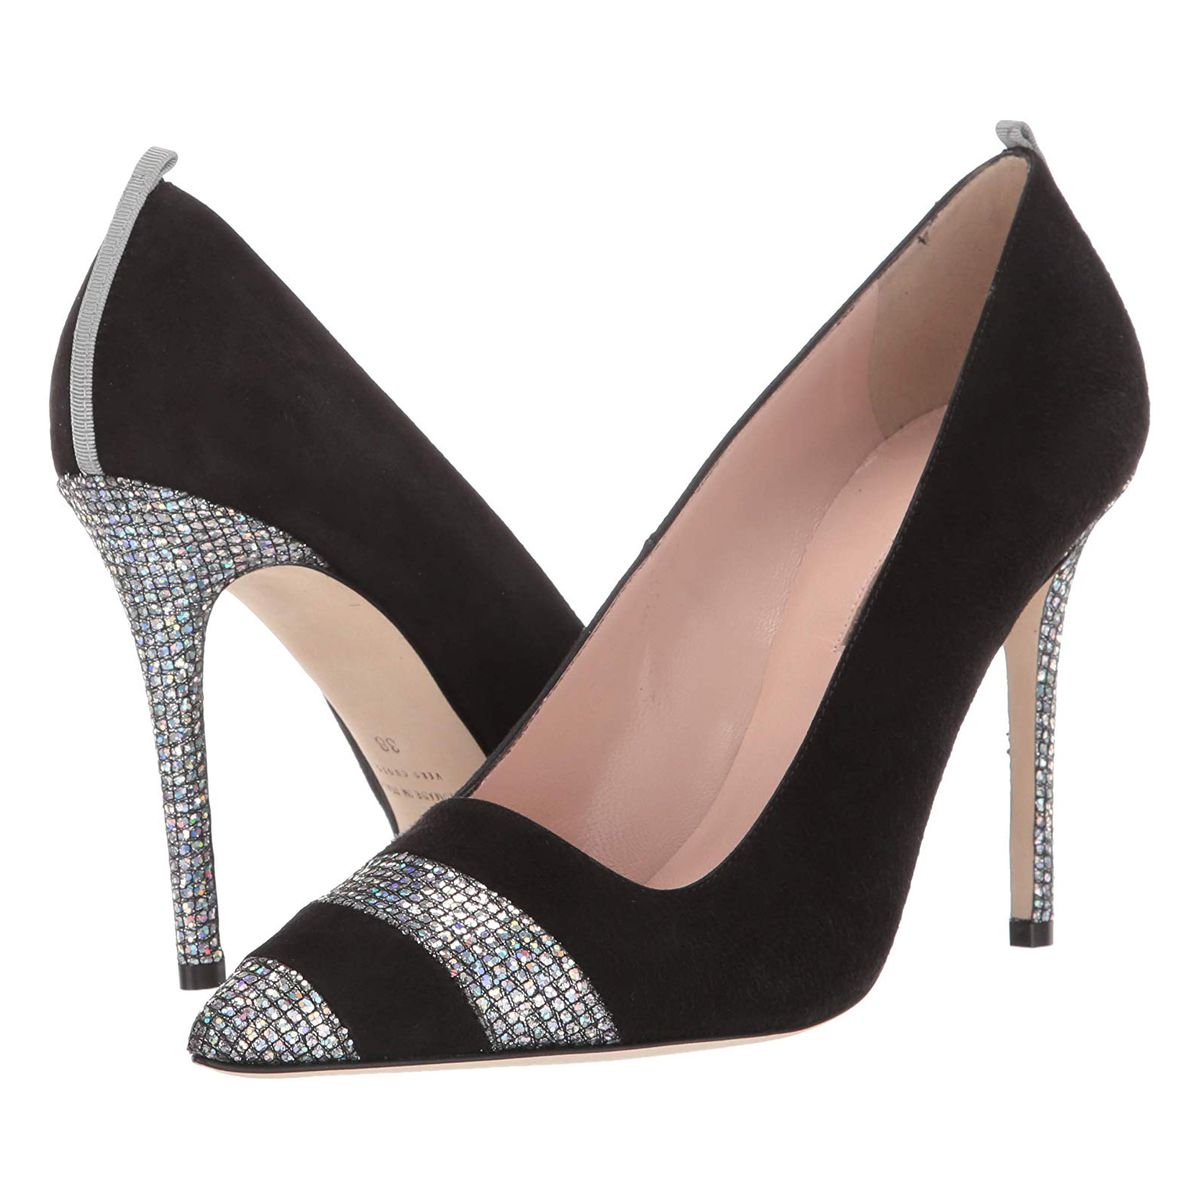 SJP by Sarah Jessica Parker Holiday Party Shoes on Sale | InStyle